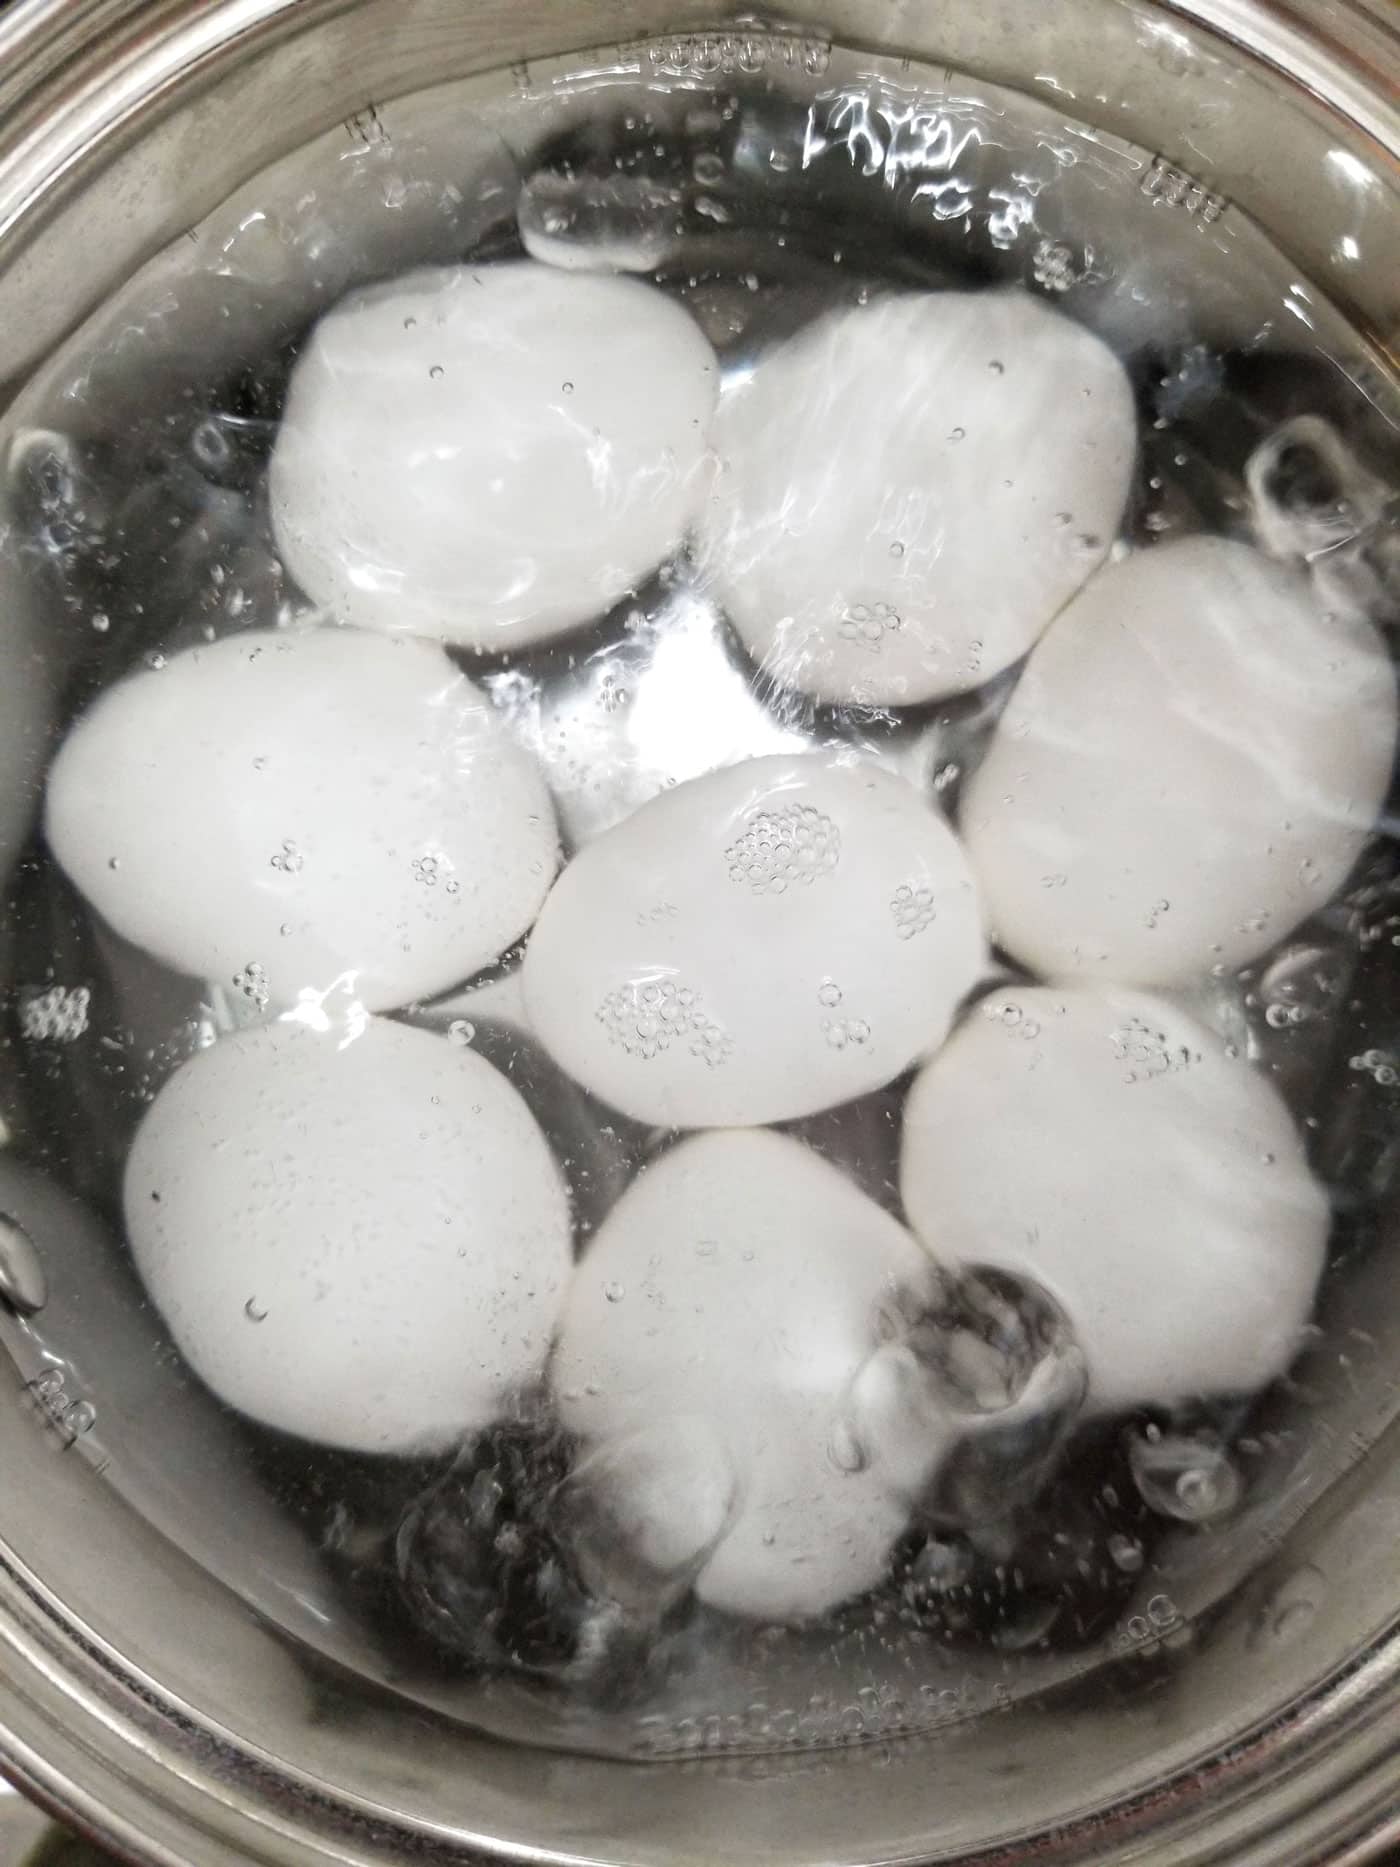 boiling water to cook eggs